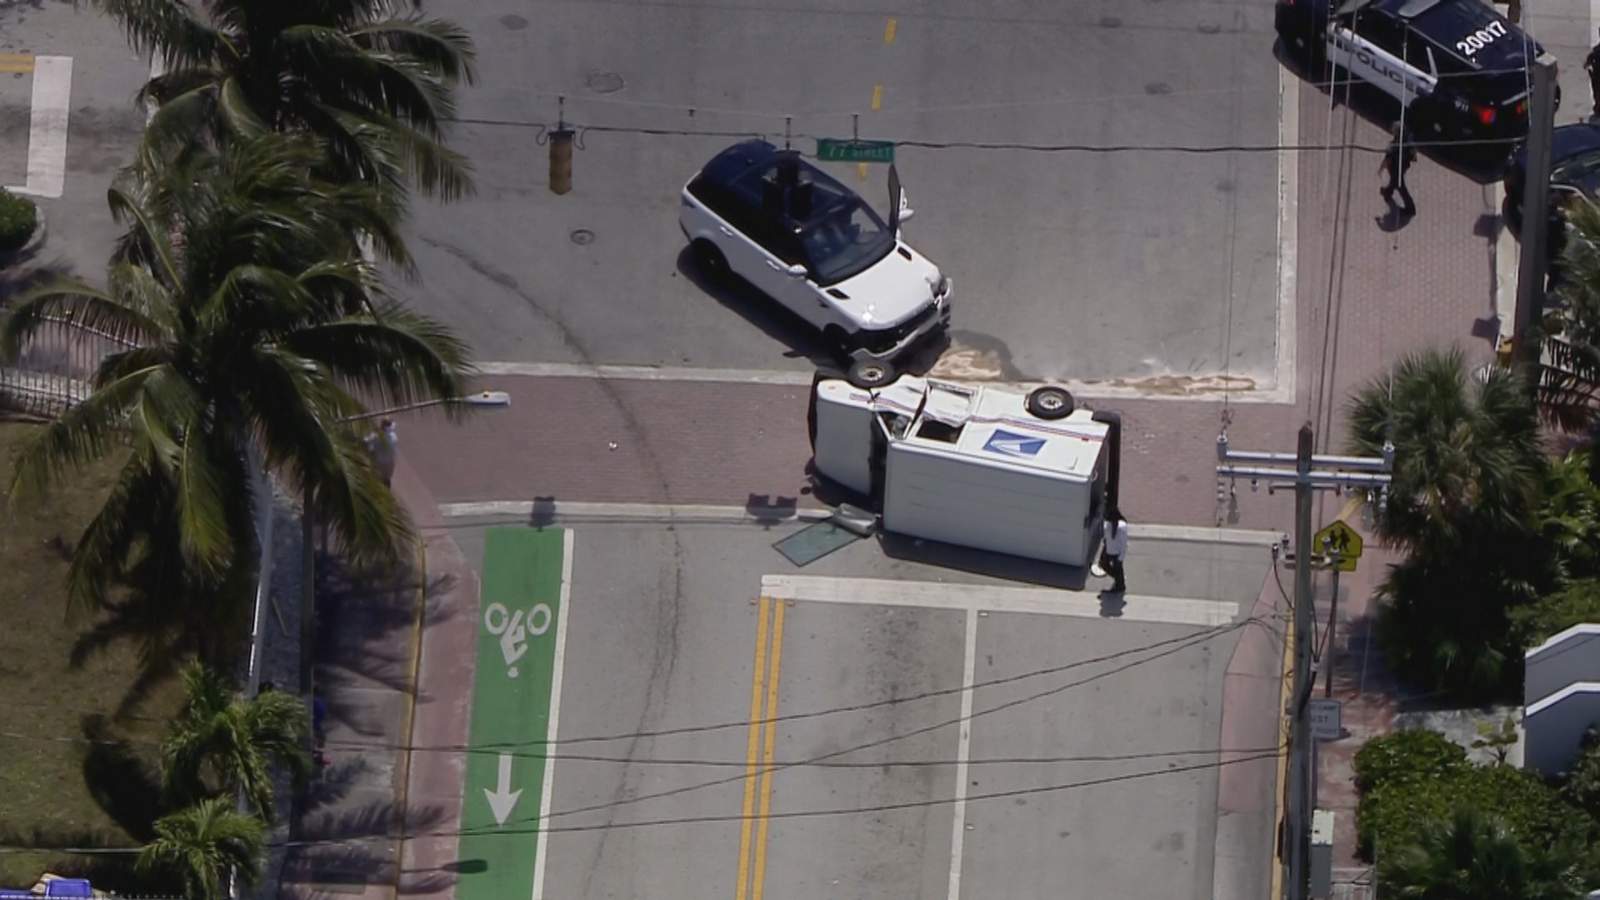 2 injured after USPS truck, Range Rover collide in Miami Beach